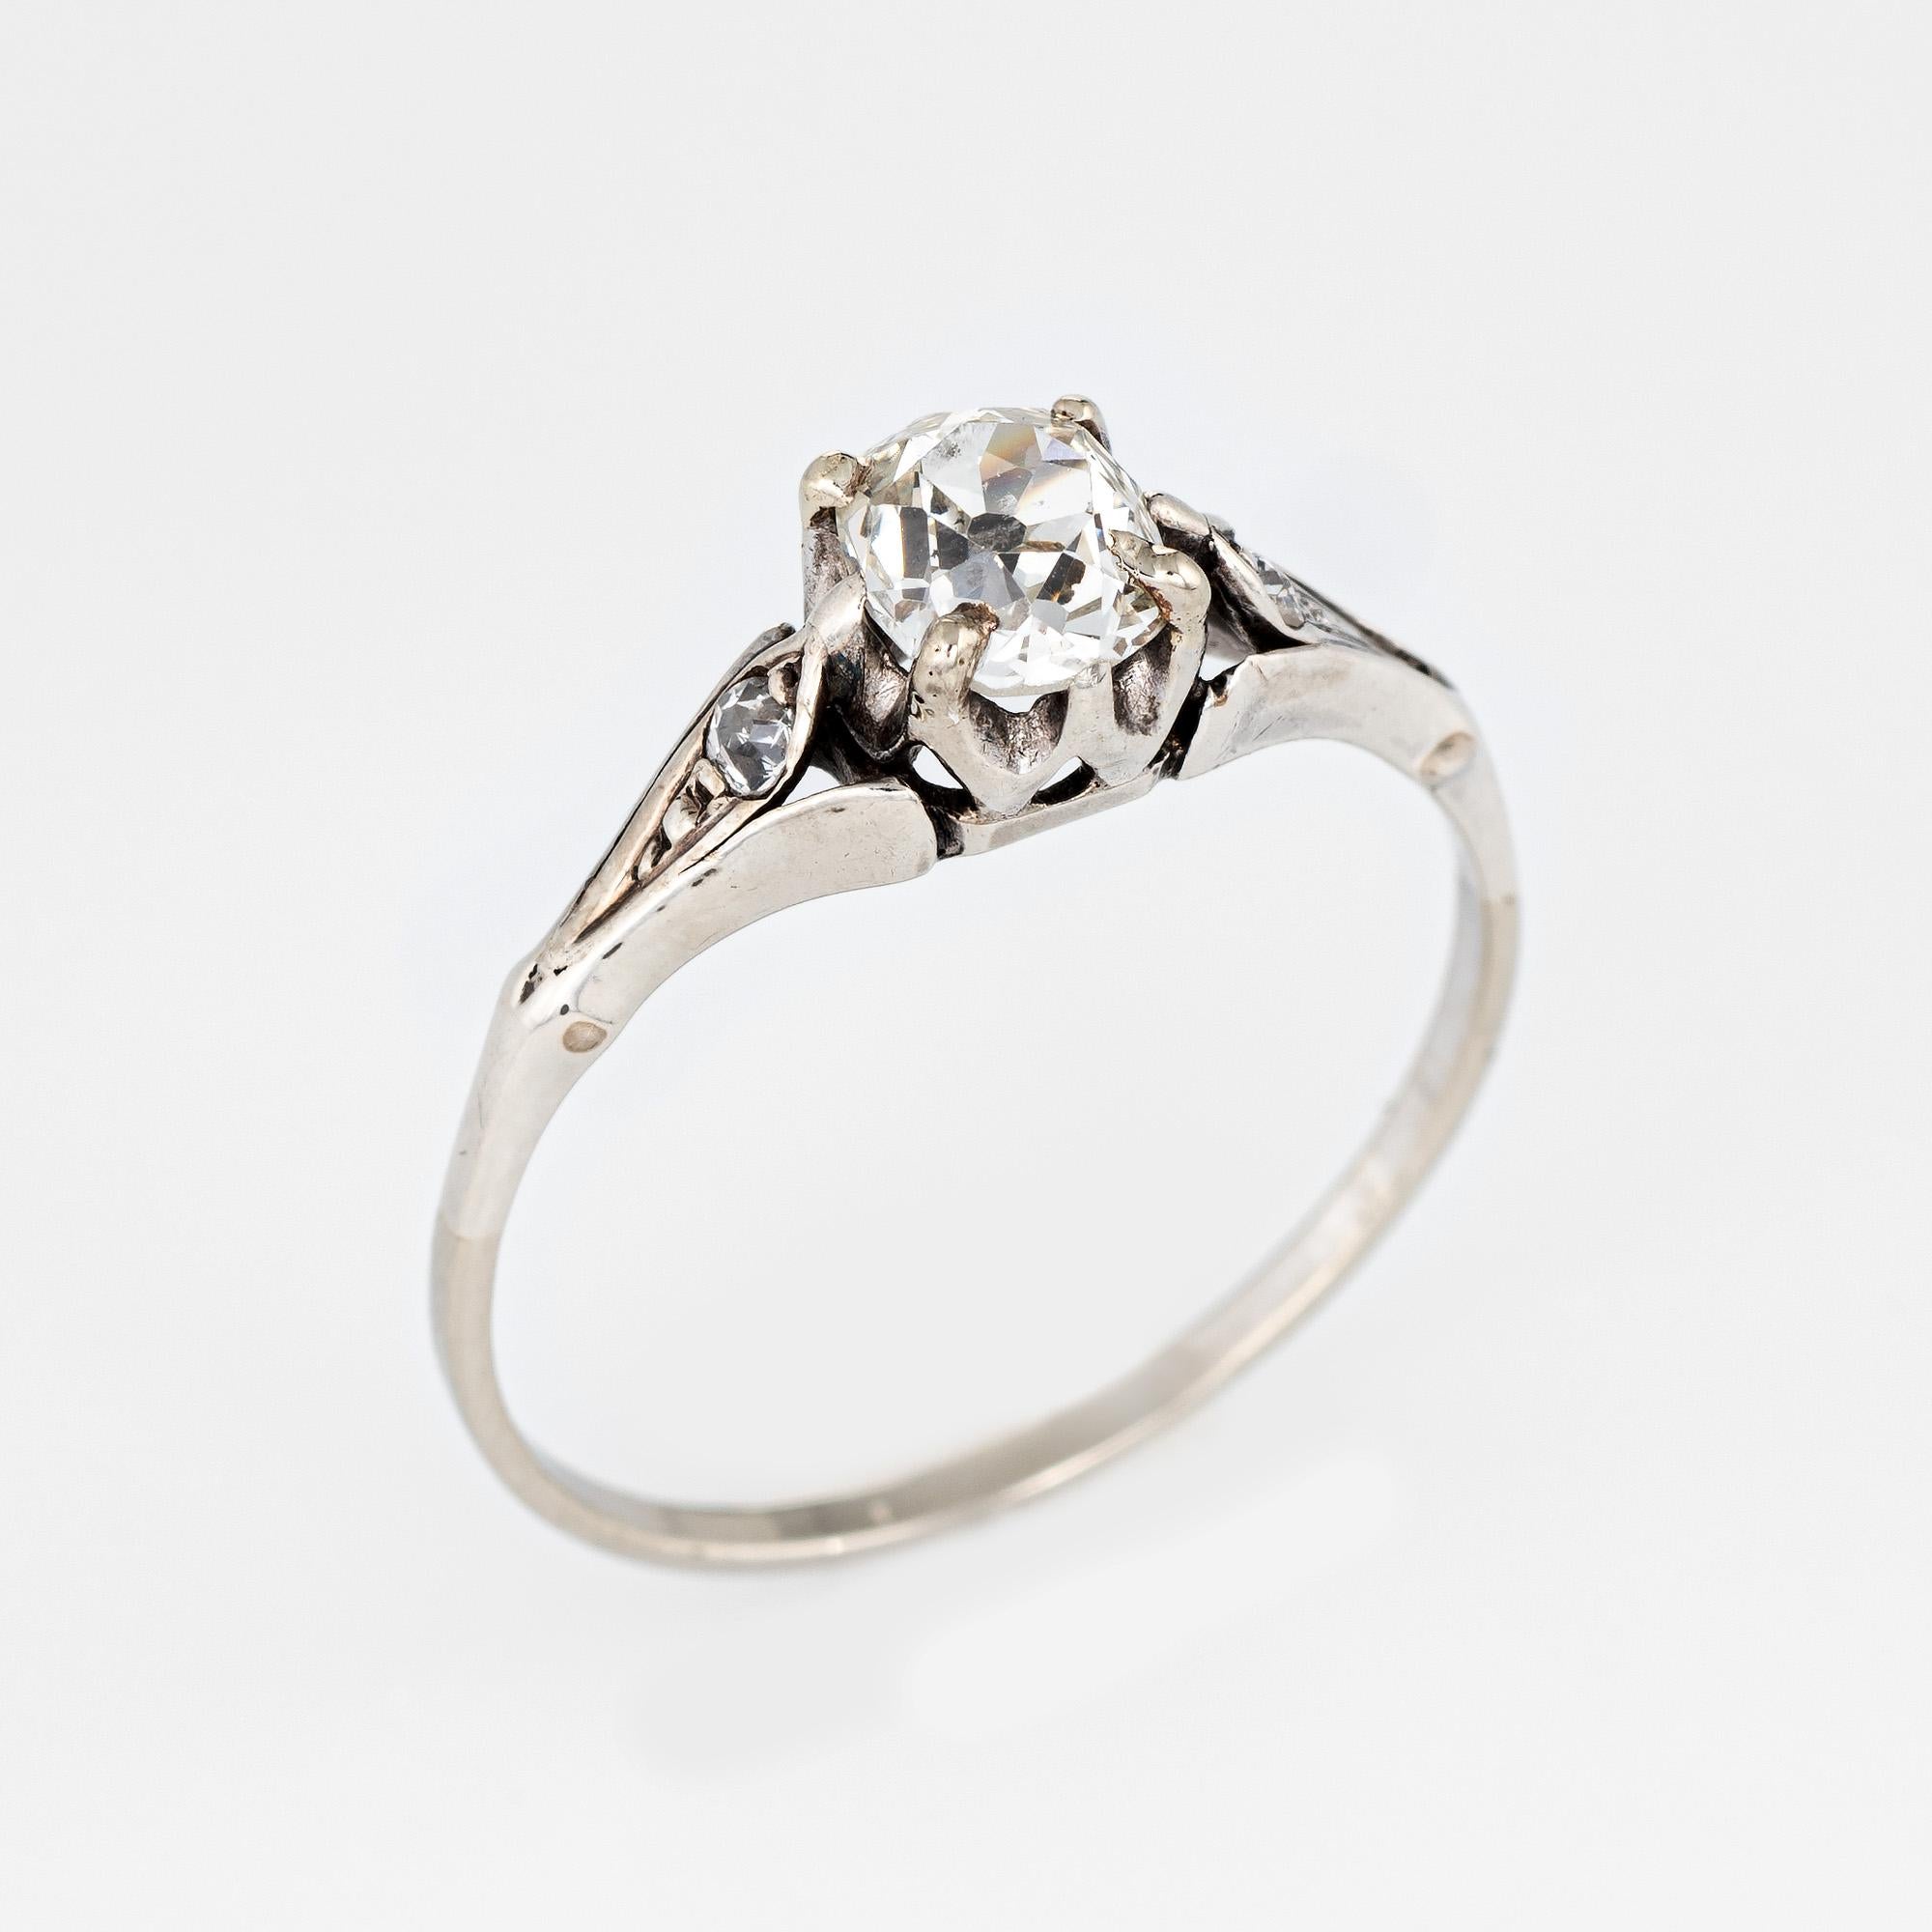 Elegant & finely detailed Art Deco era ring (circa 1920s to 1930s) crafted in 10k white gold. 

Centrally mounted estimated 0.75 carat old cushion cut diamond is accented with two estimated 0.03 carat old rose cut diamonds. The total diamond weight